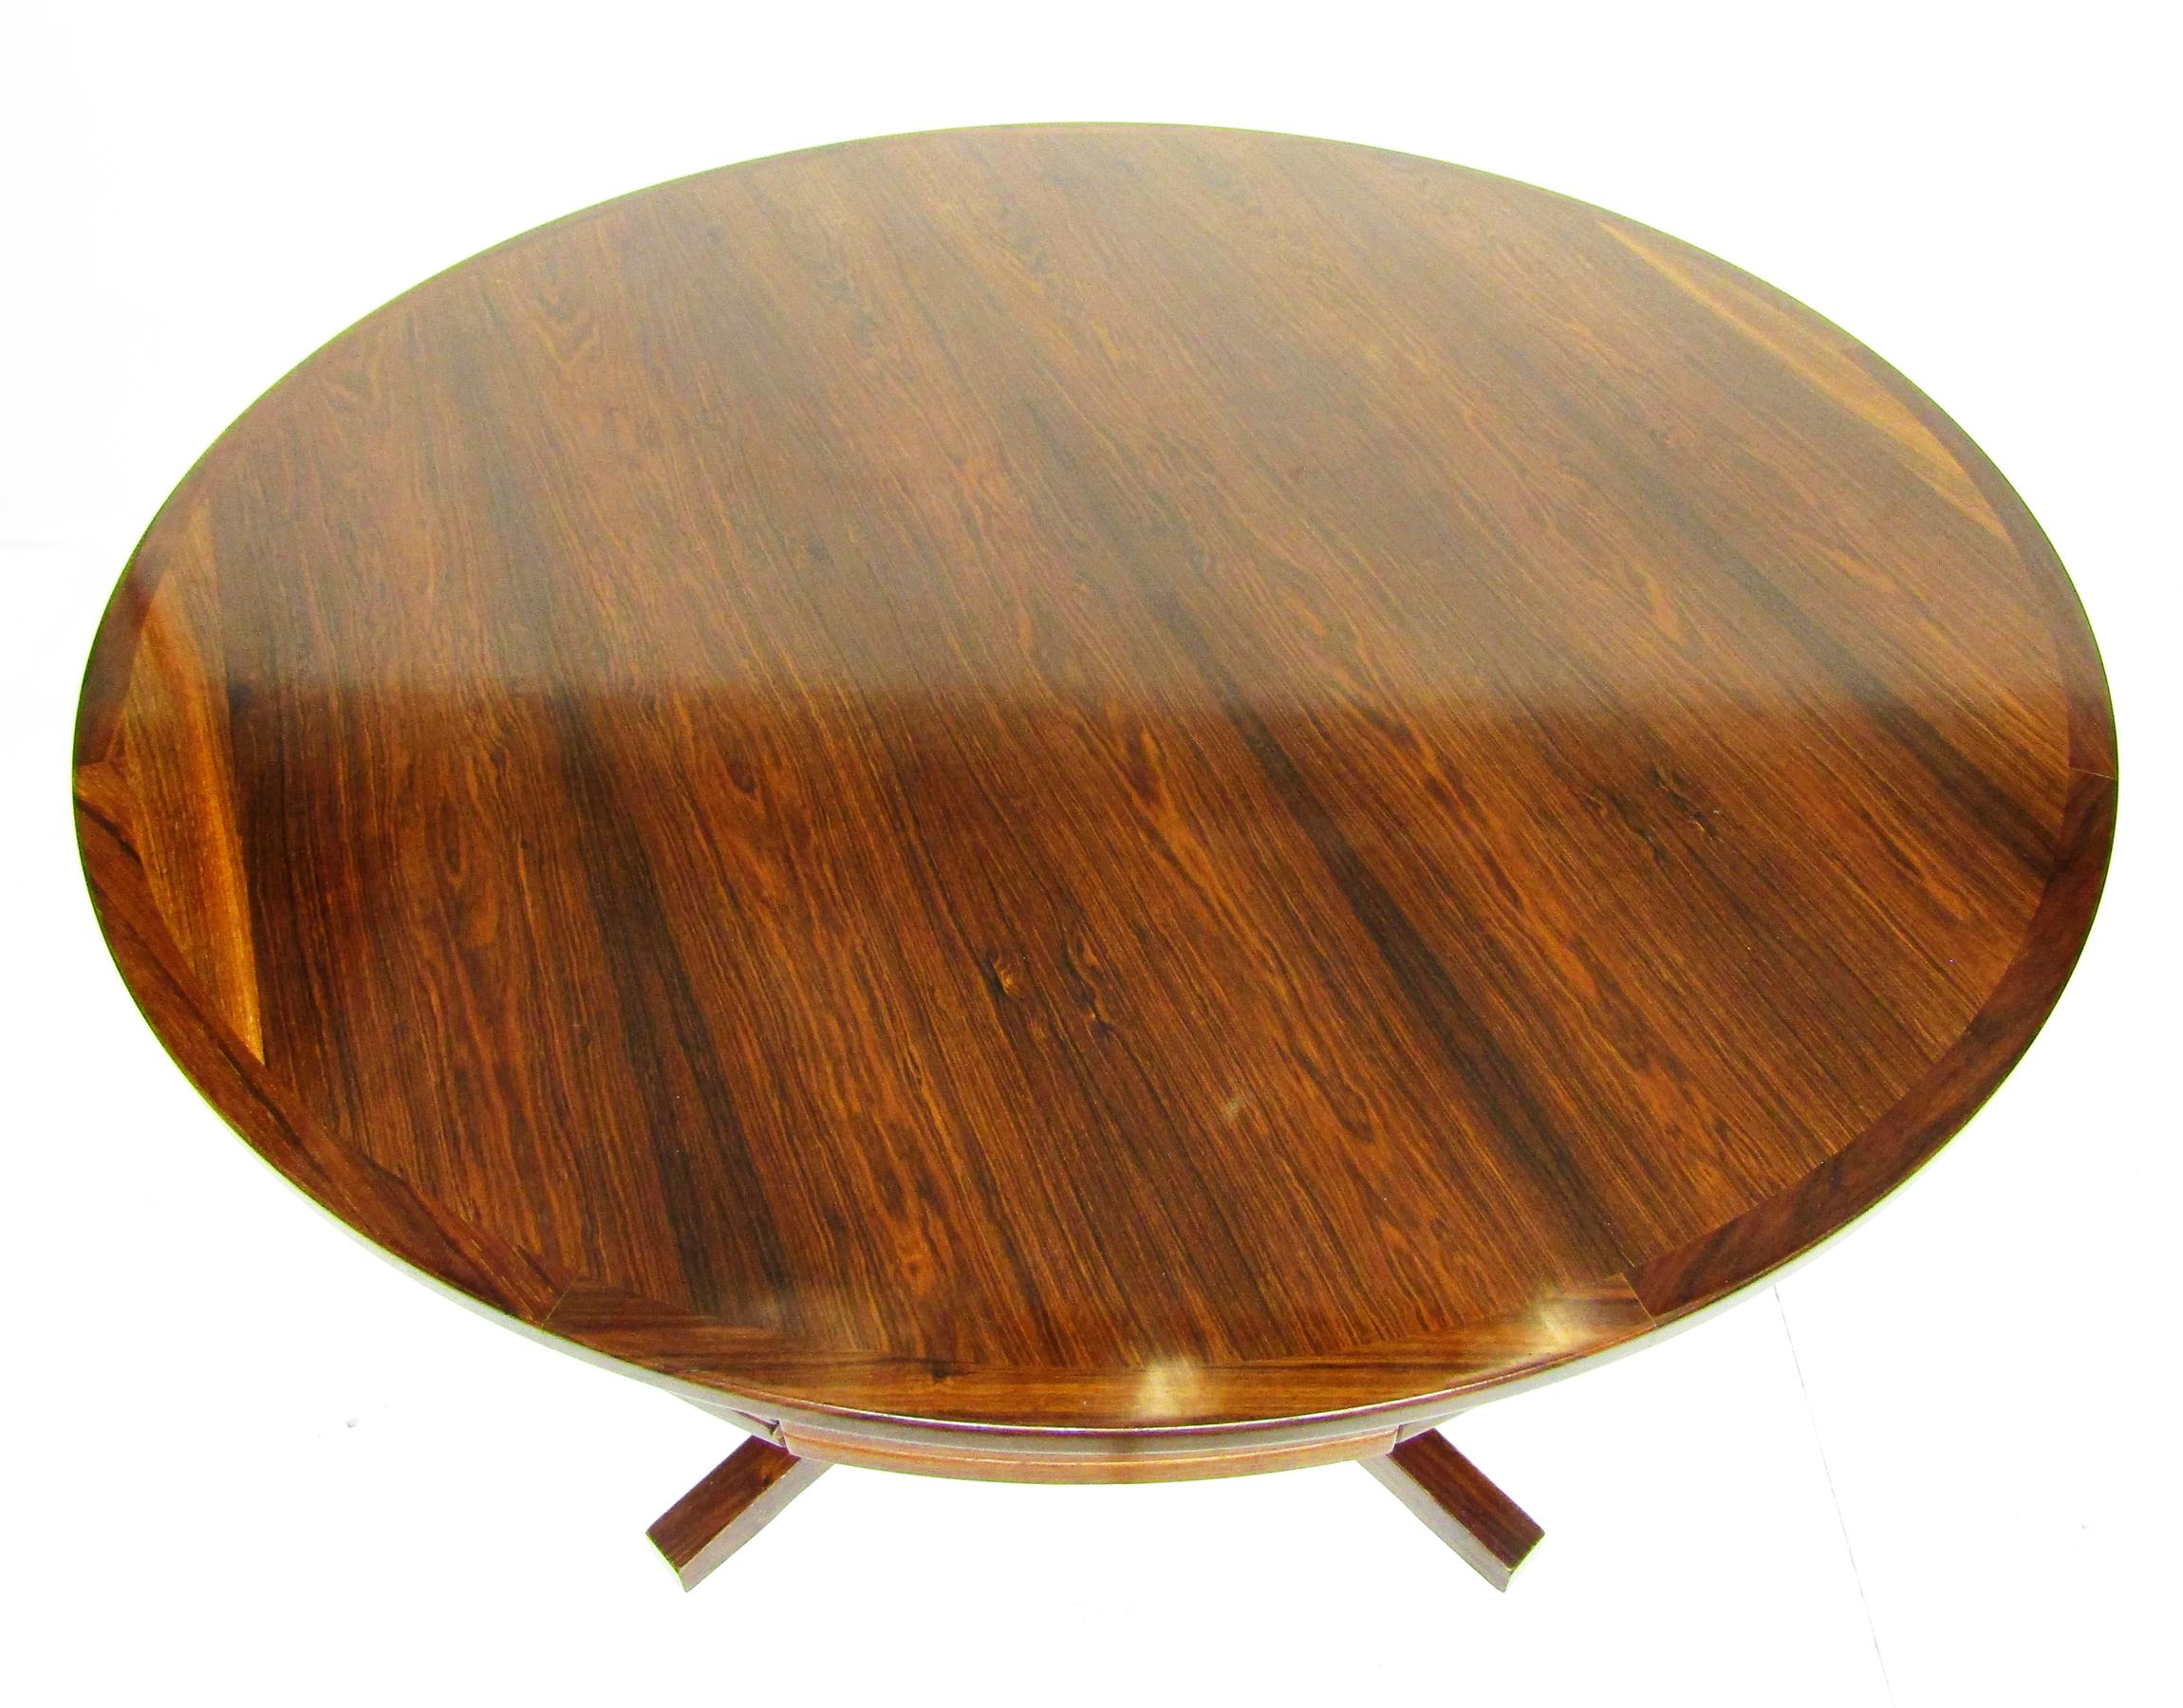 Danish Rosewood Circular Lotus / Flip Flap Extending Dining Table By Dyrlund In Good Condition For Sale In Shepperton, Surrey